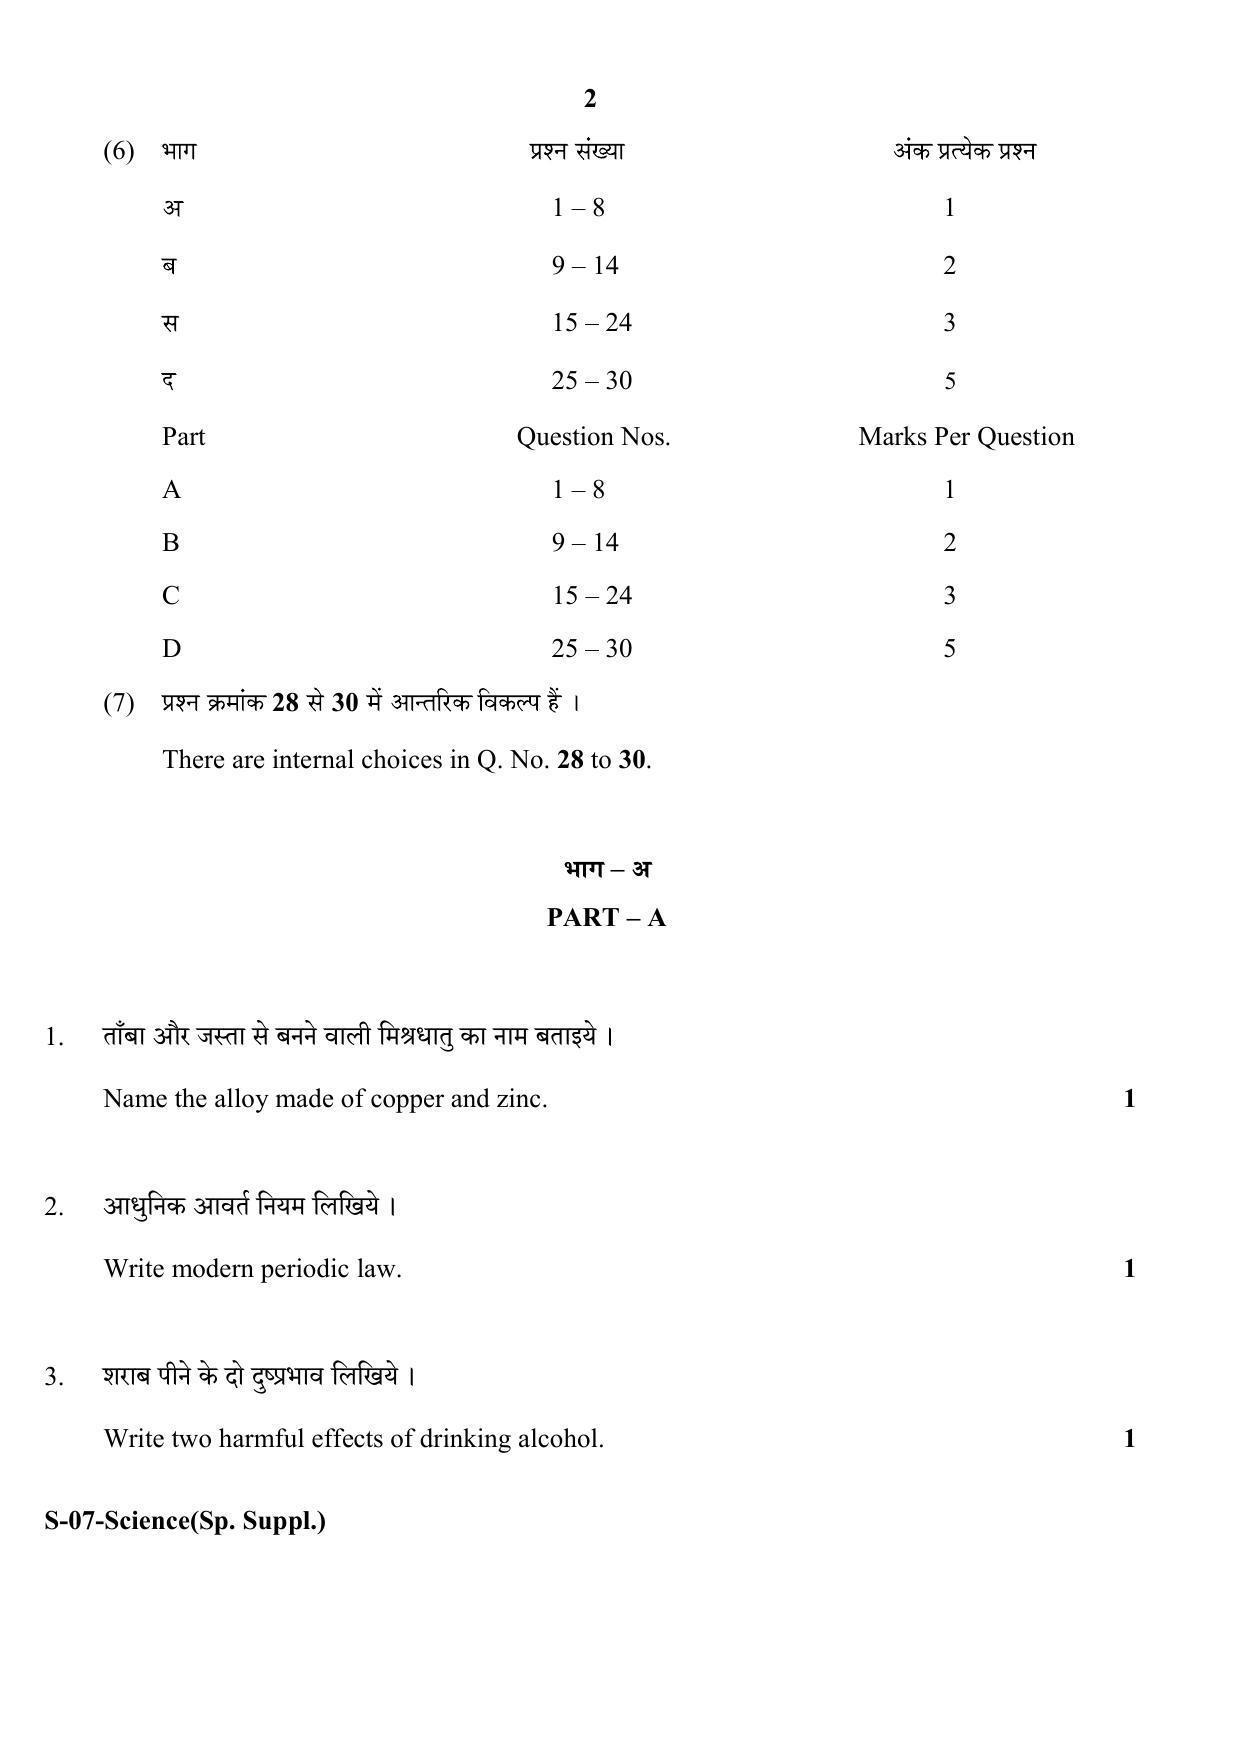 RBSE Class 10 Science ( supplementary) 2017 Question Paper - Page 2